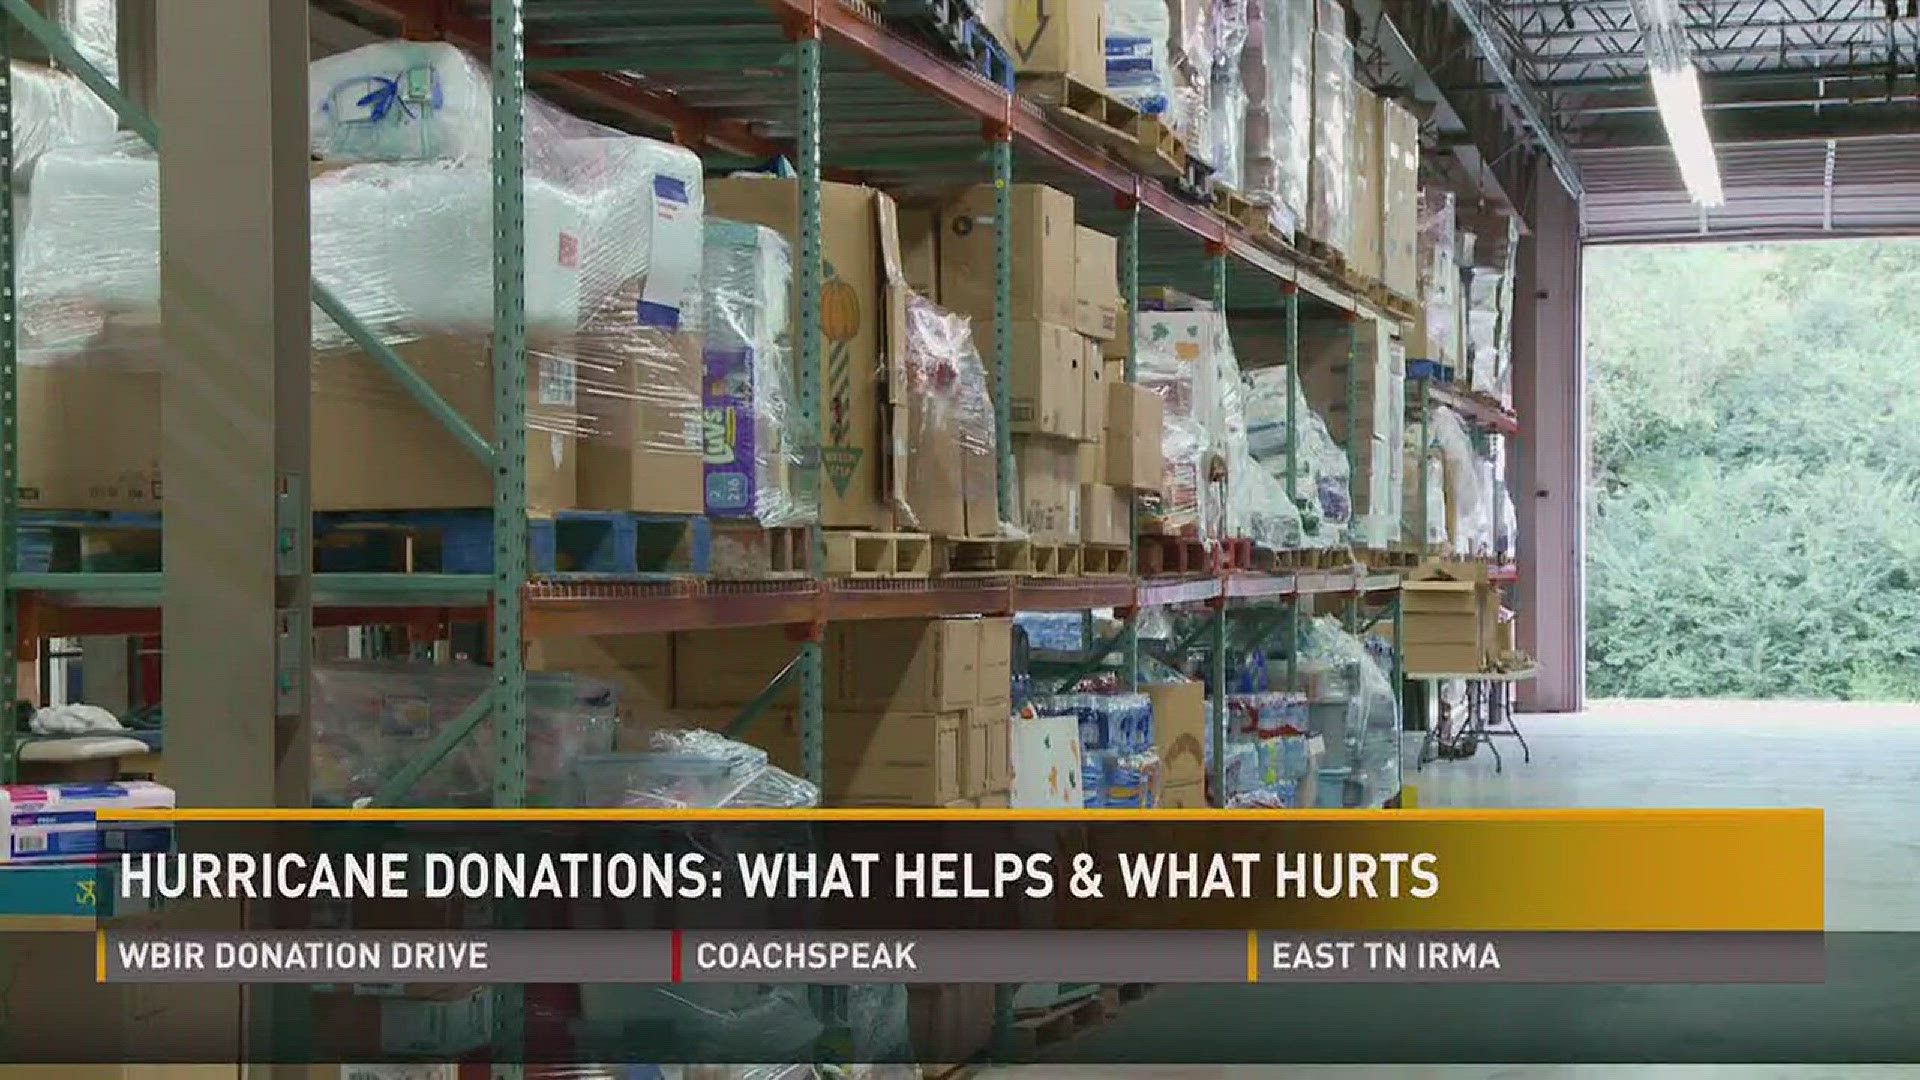 People want to help victims of hurricanes, wildfires, and other disasters. But what helps the most?